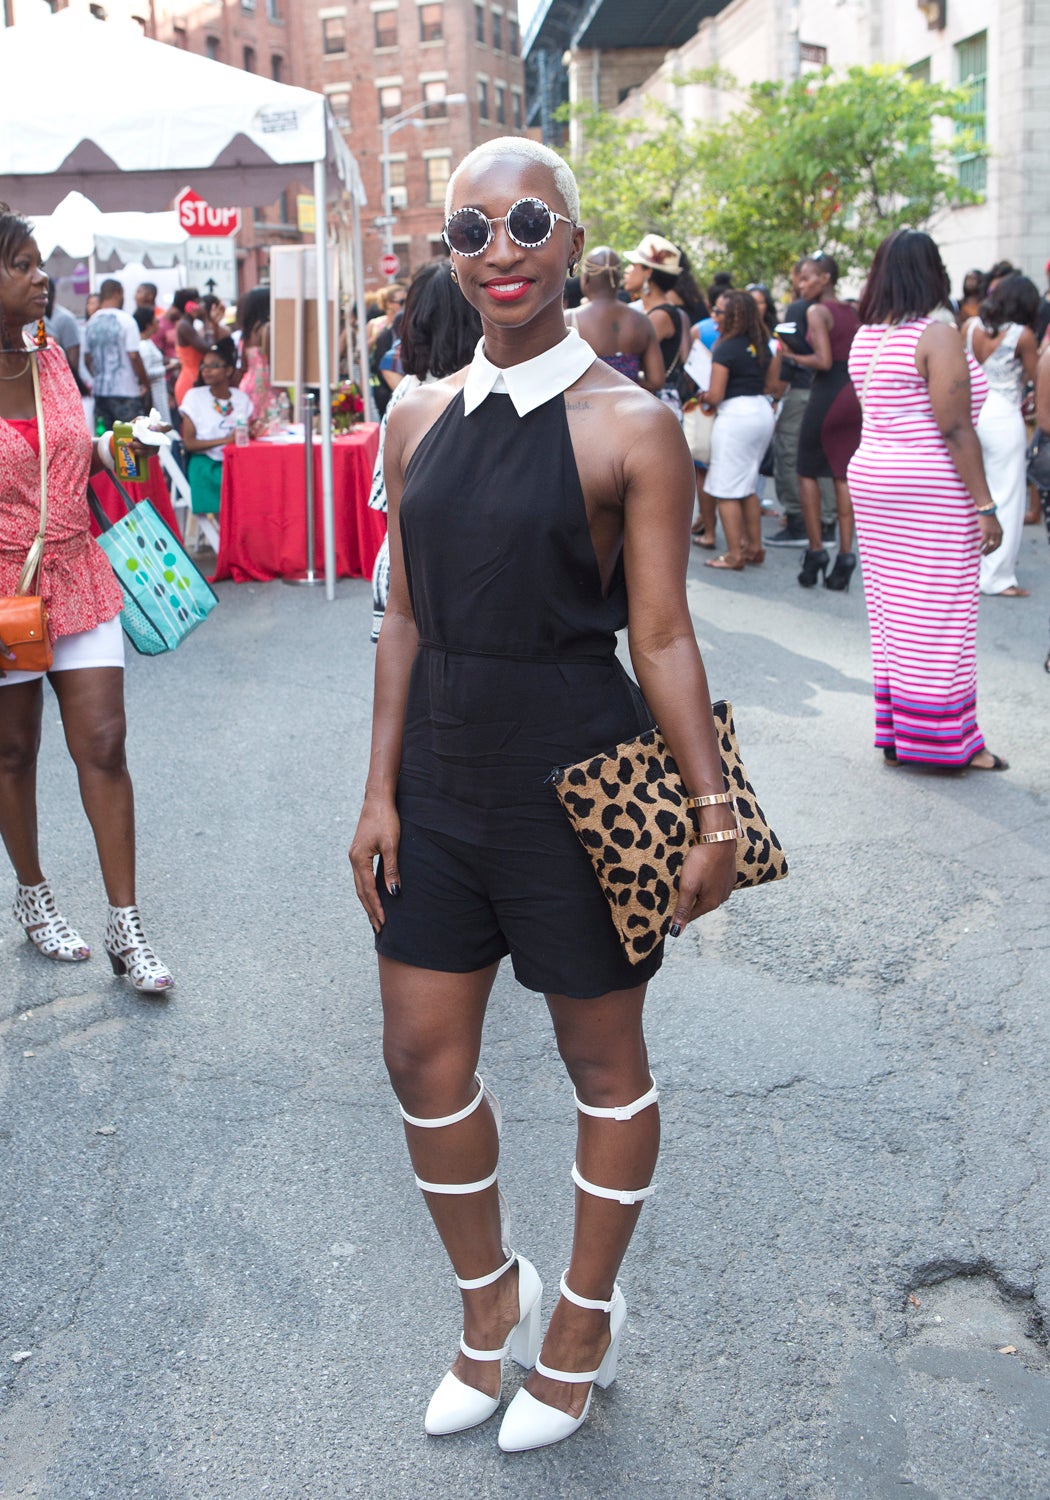 Relive Last Year's ESSENCE Street Style Block Party!
